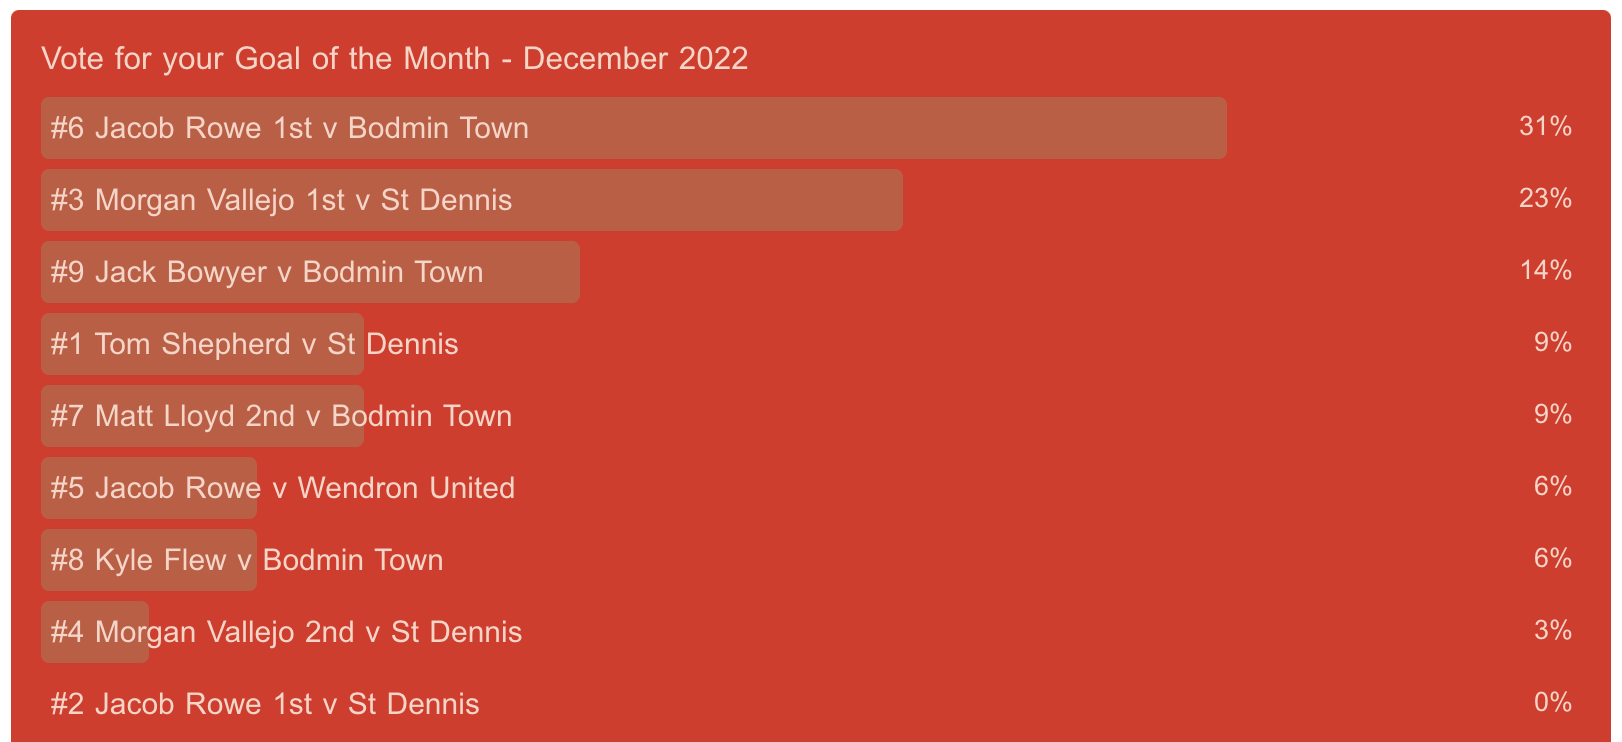 Goal of the Month Results - December 2022